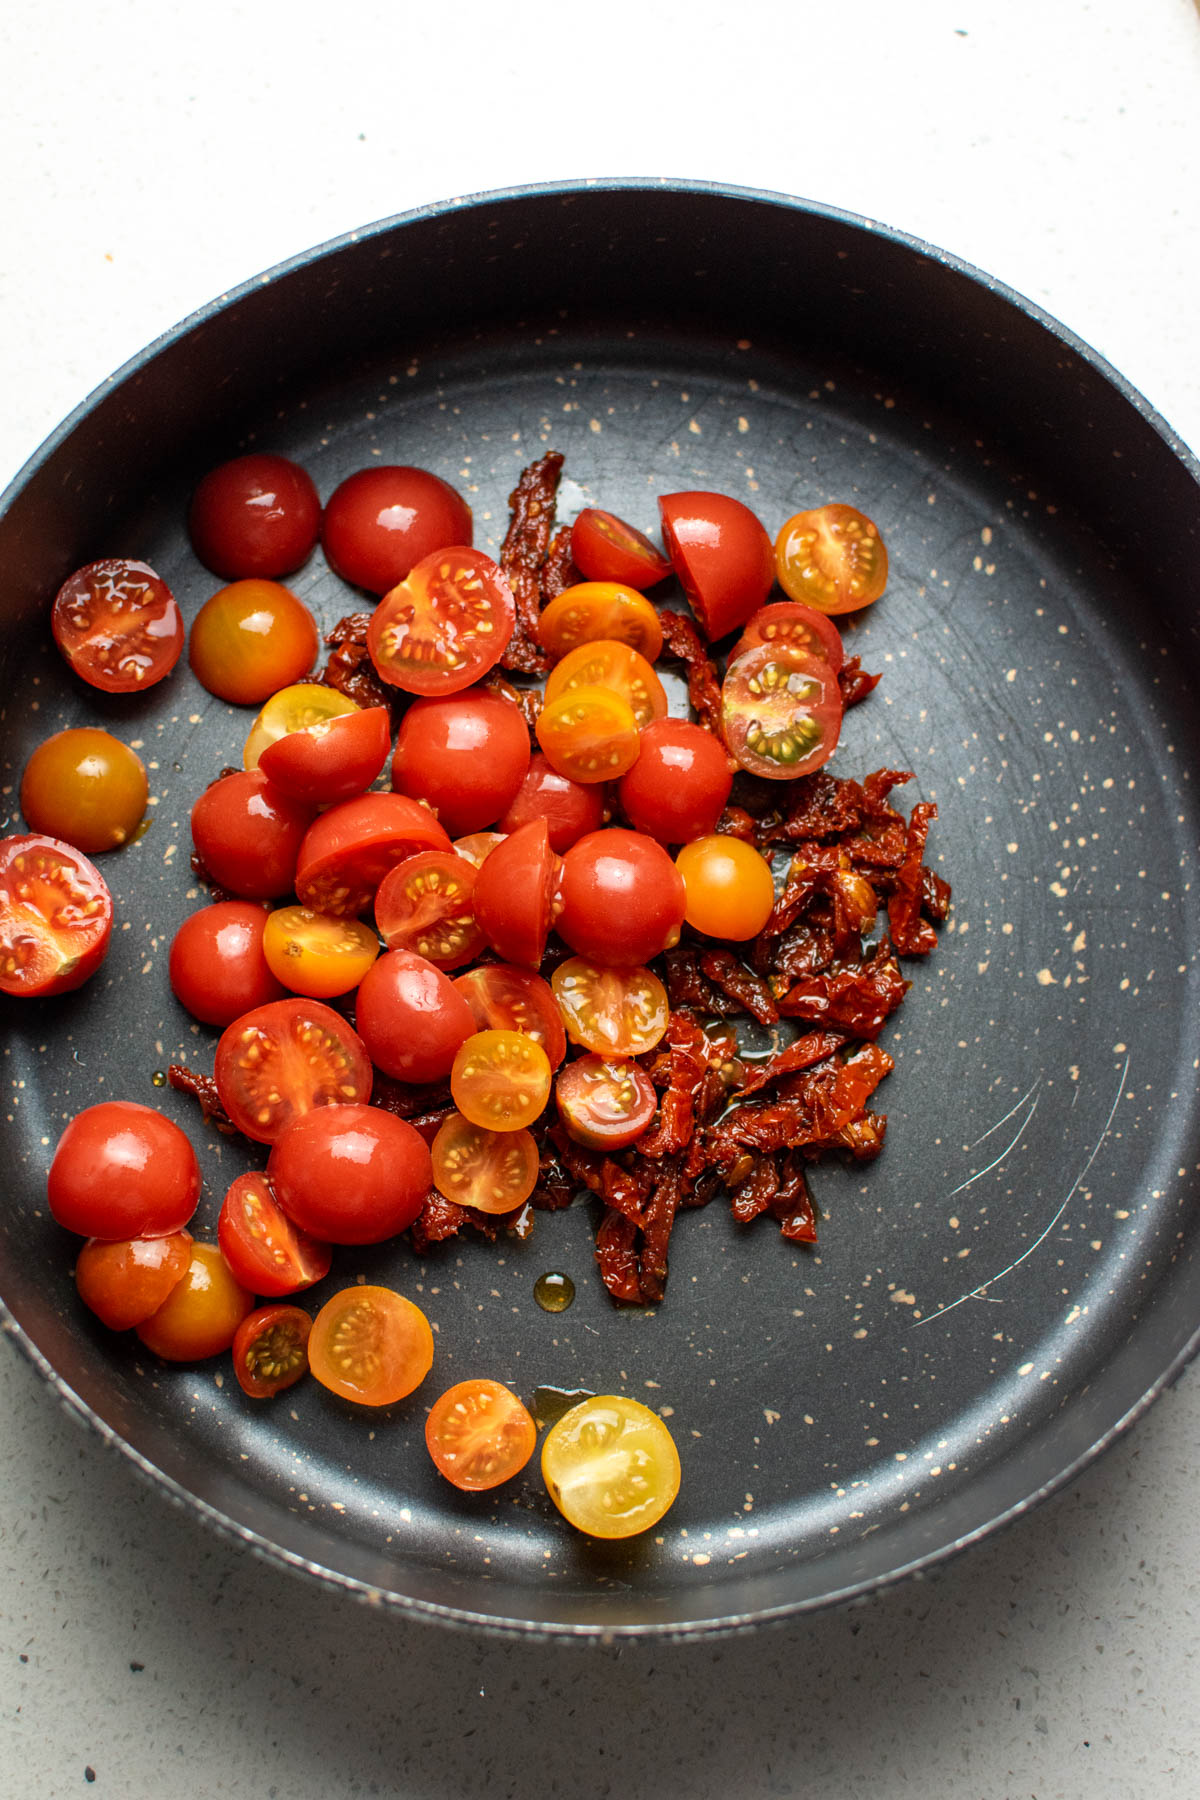 Cut cherry tomatoes and sun dried tomatoes in large black skillet.